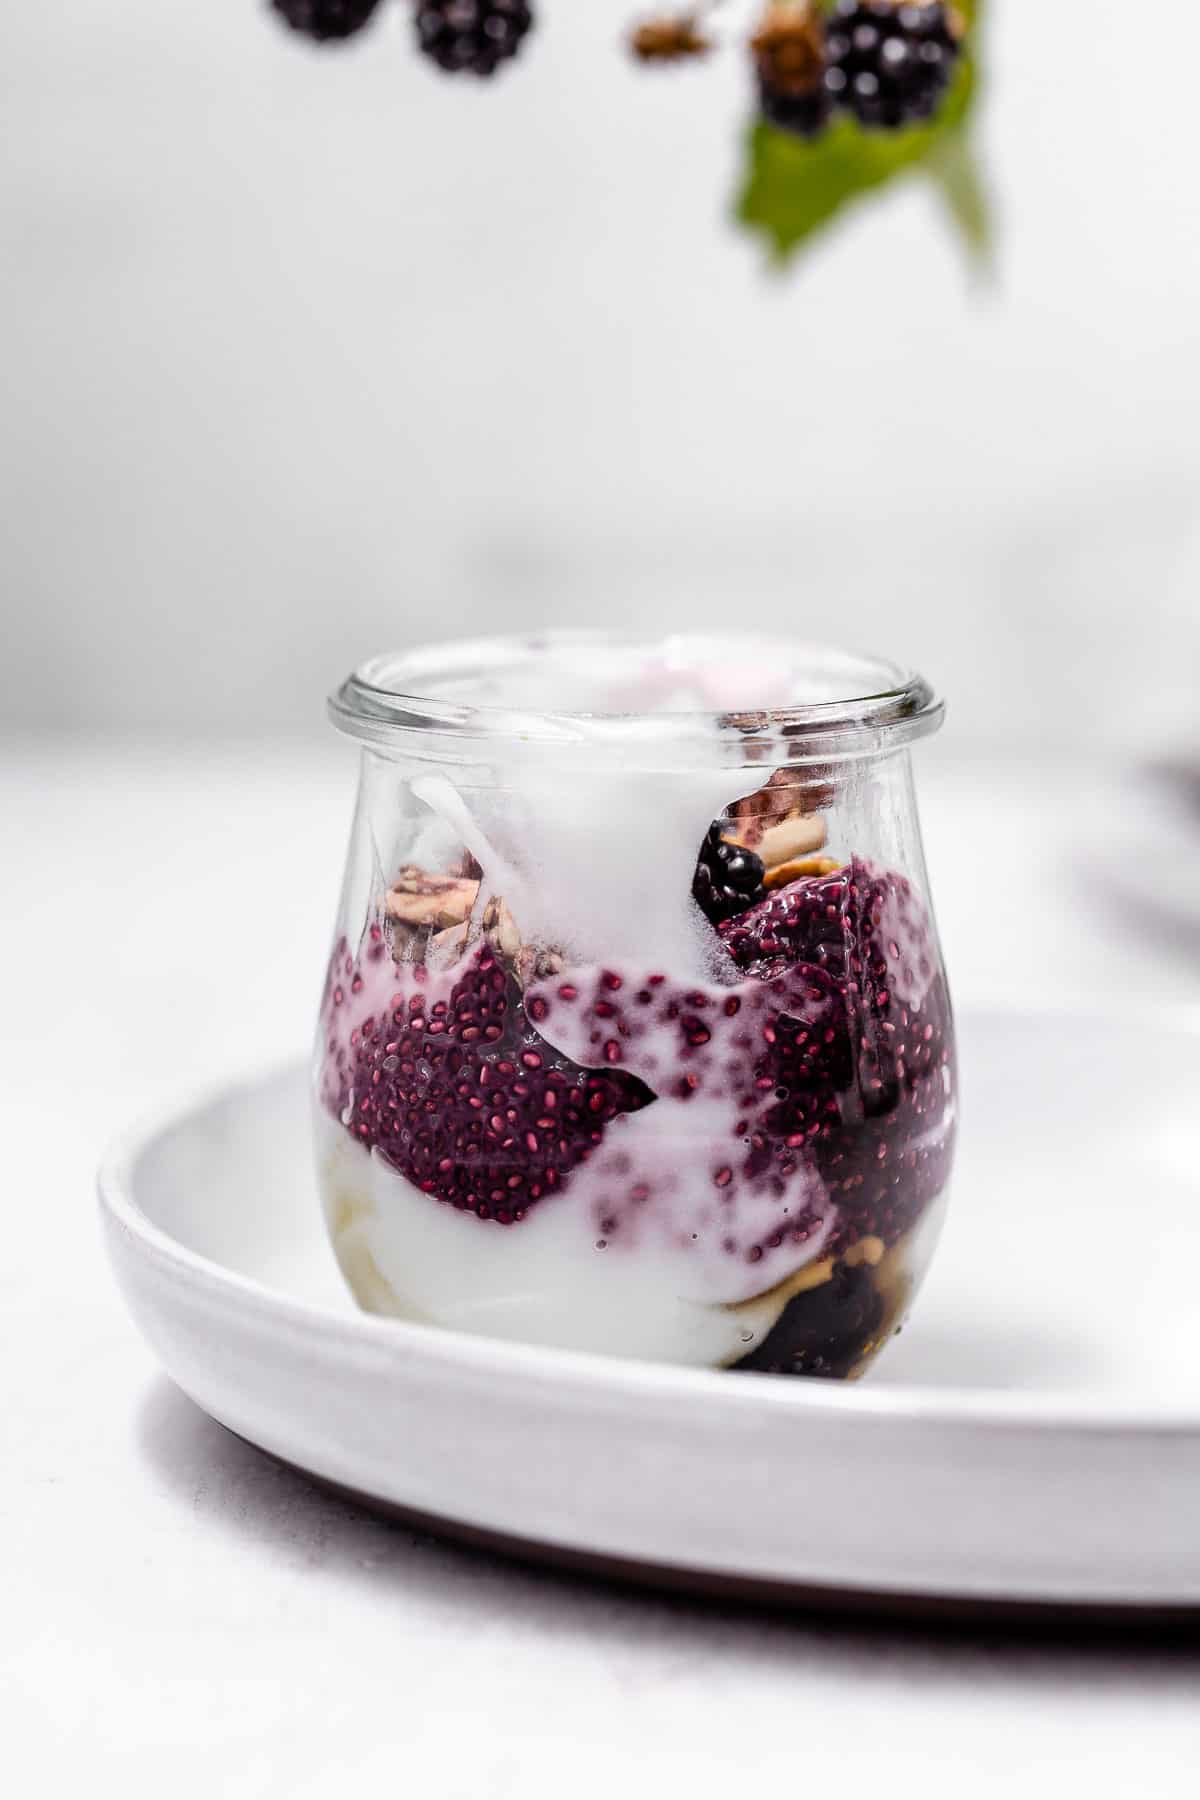 A small jar of blackberry chia pudding with coconut yogurt stirred in and a branch of blackberries hanging overhead.